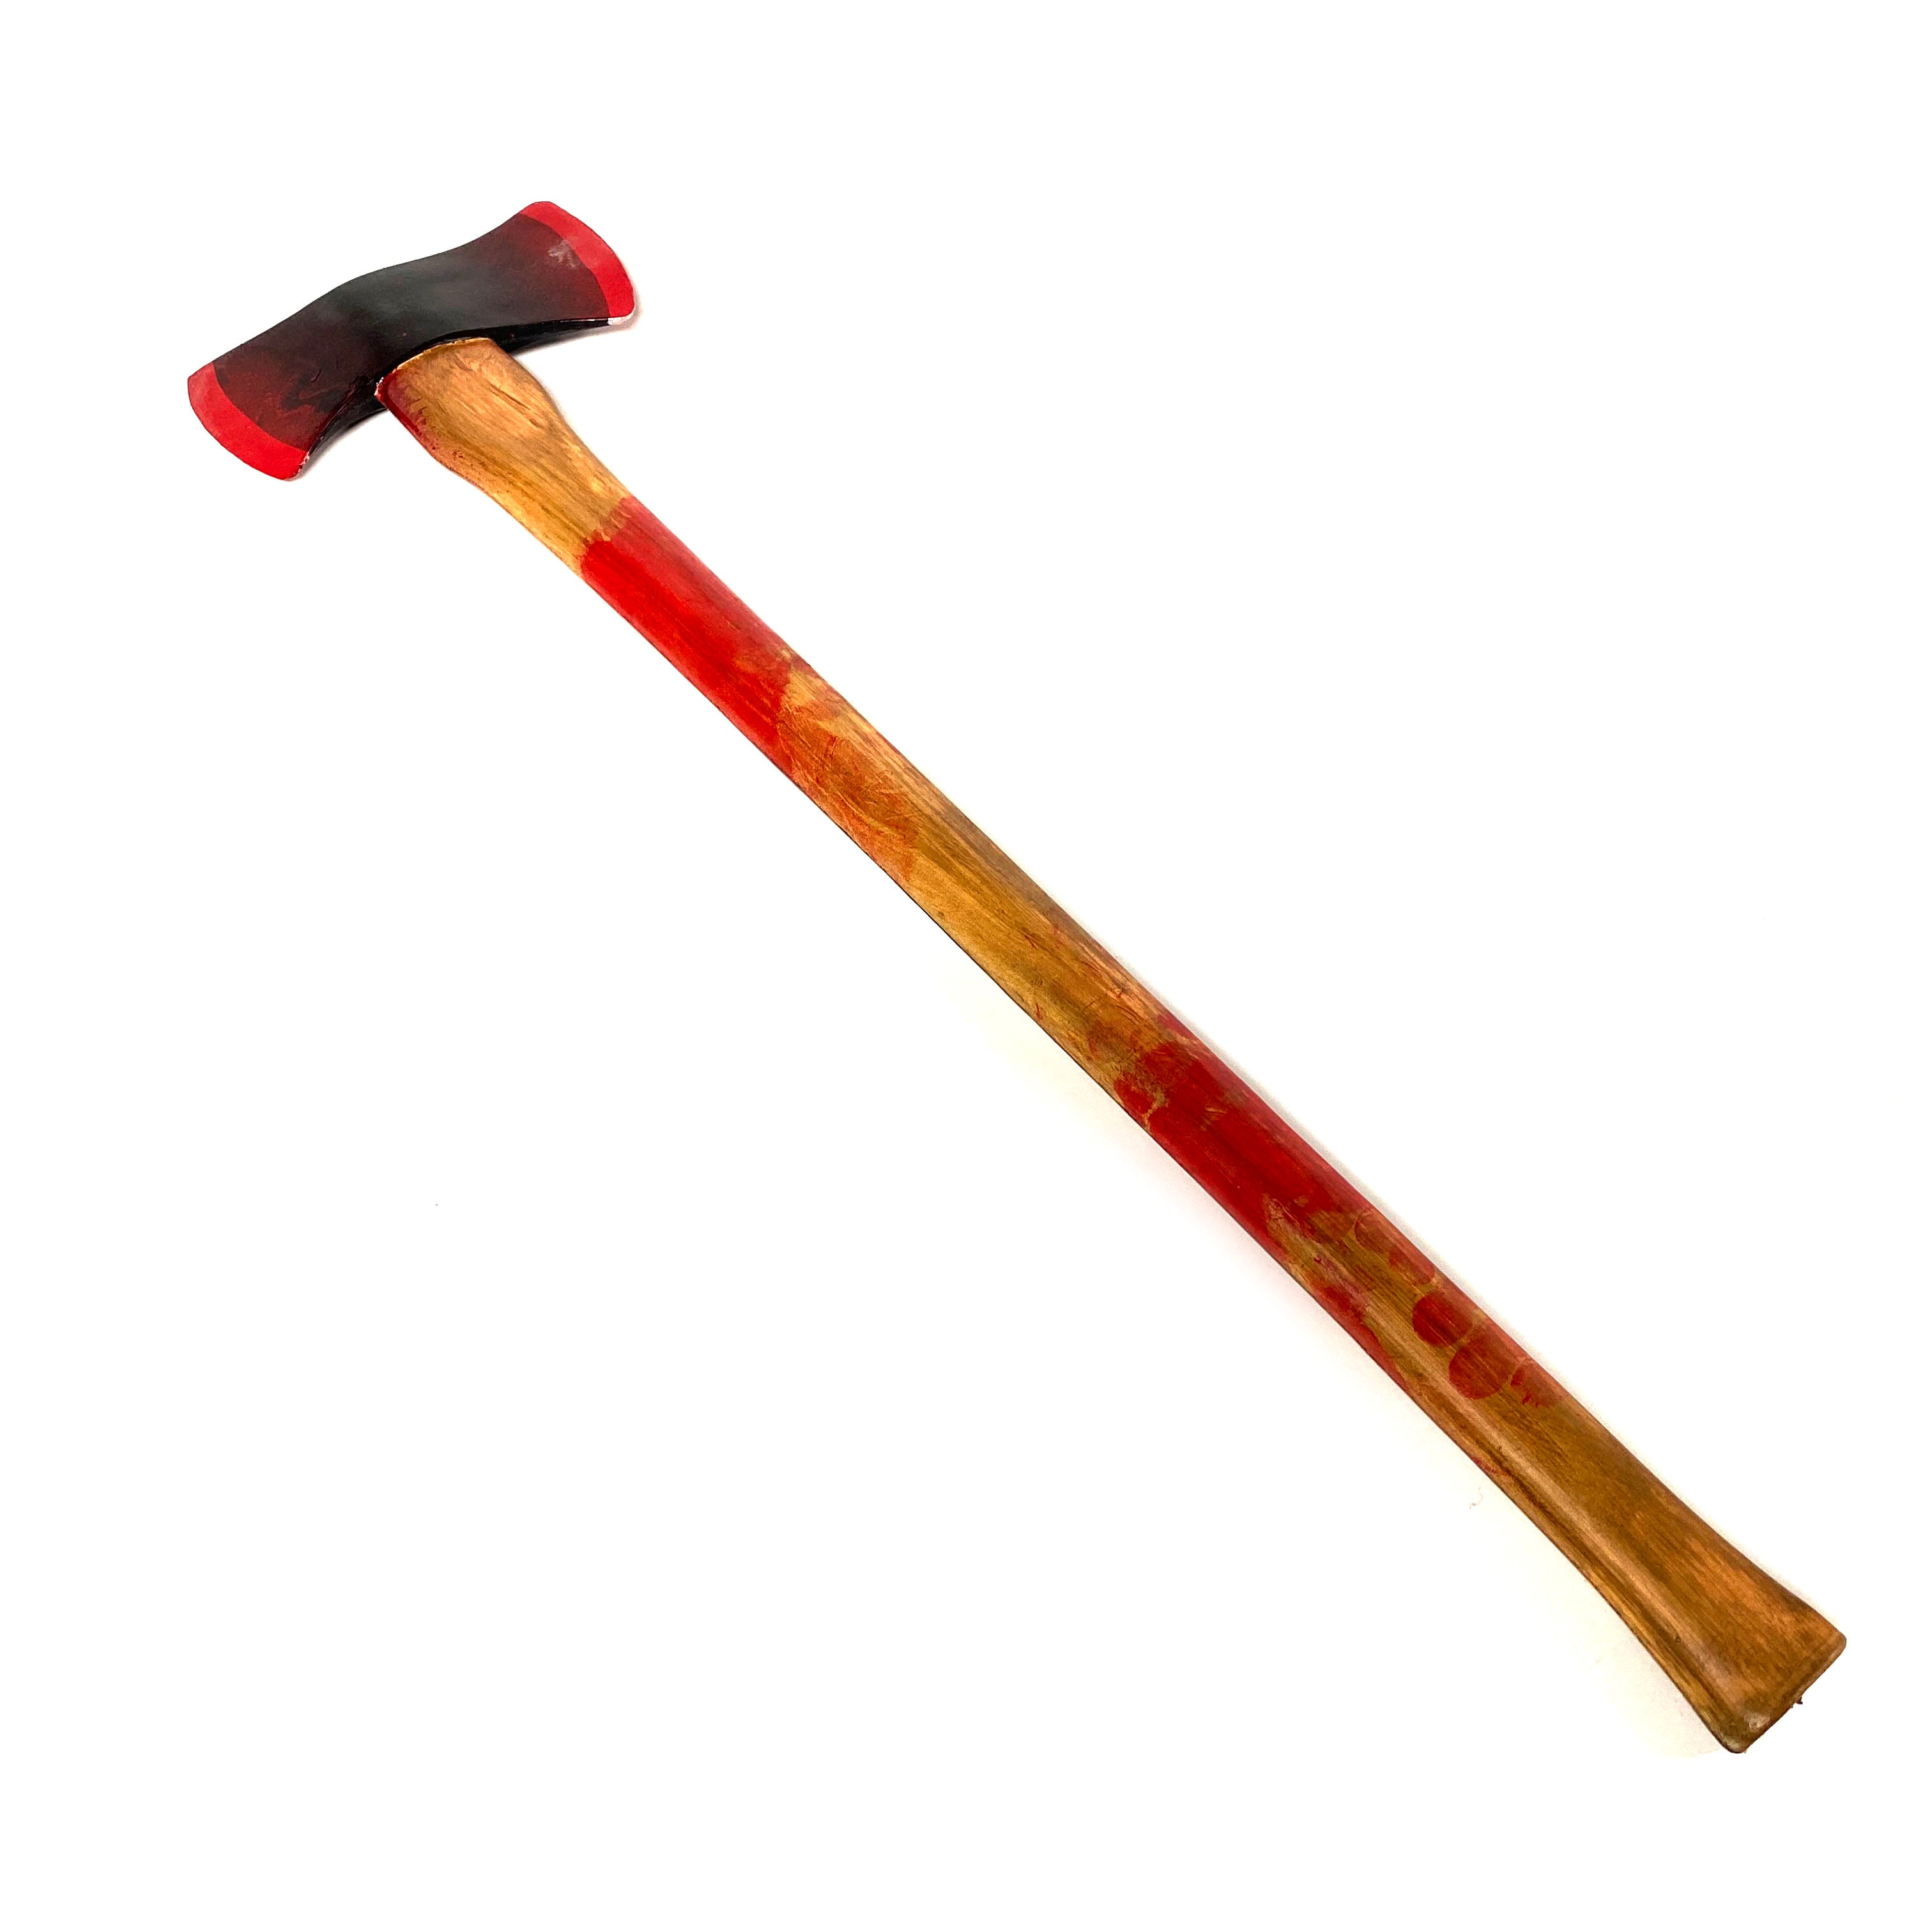 35 Inch Dual Head Urethane Foam Rubber Axe Stunt Prop - BLOODY - Bloodied Silver Head with Aged Handle